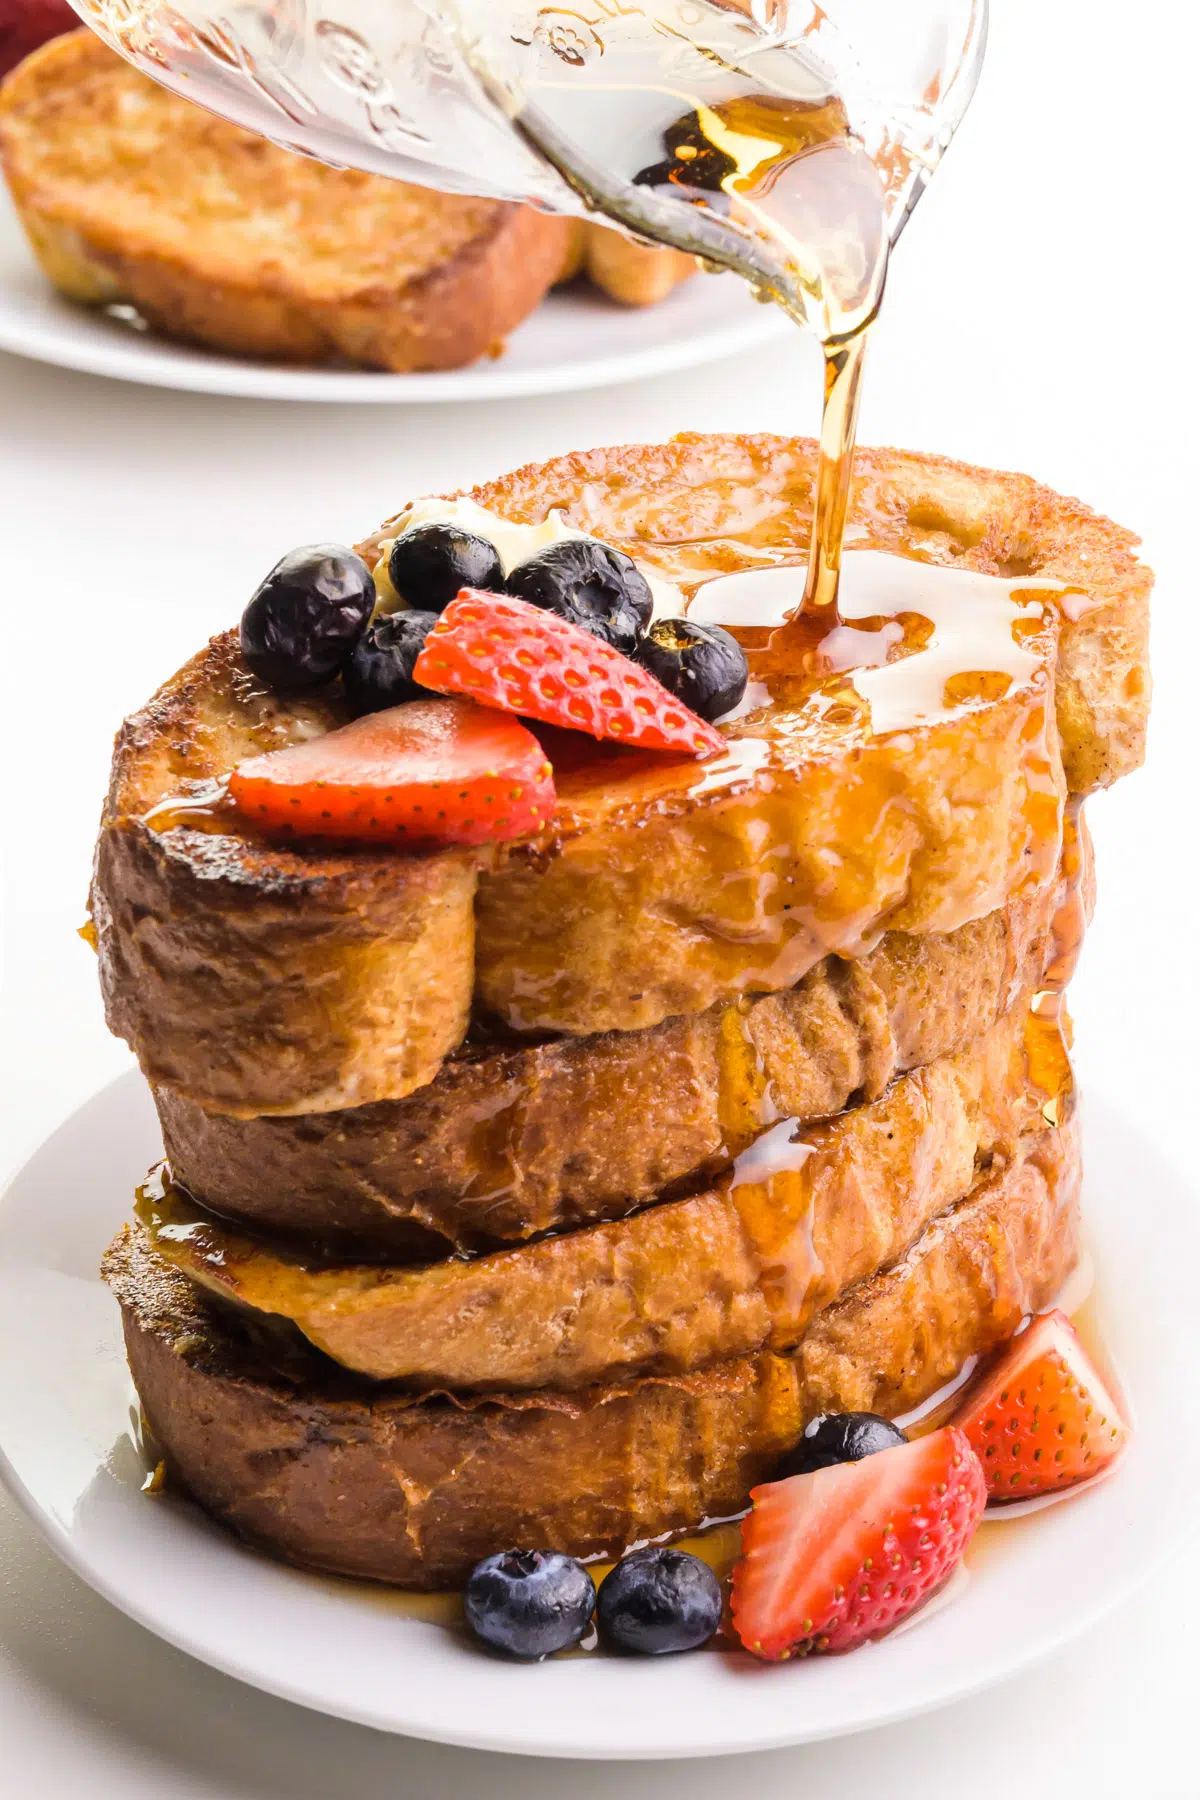 Syrup is being poured over a stack of vegan French toast. There's a plate with more French toast in the background.